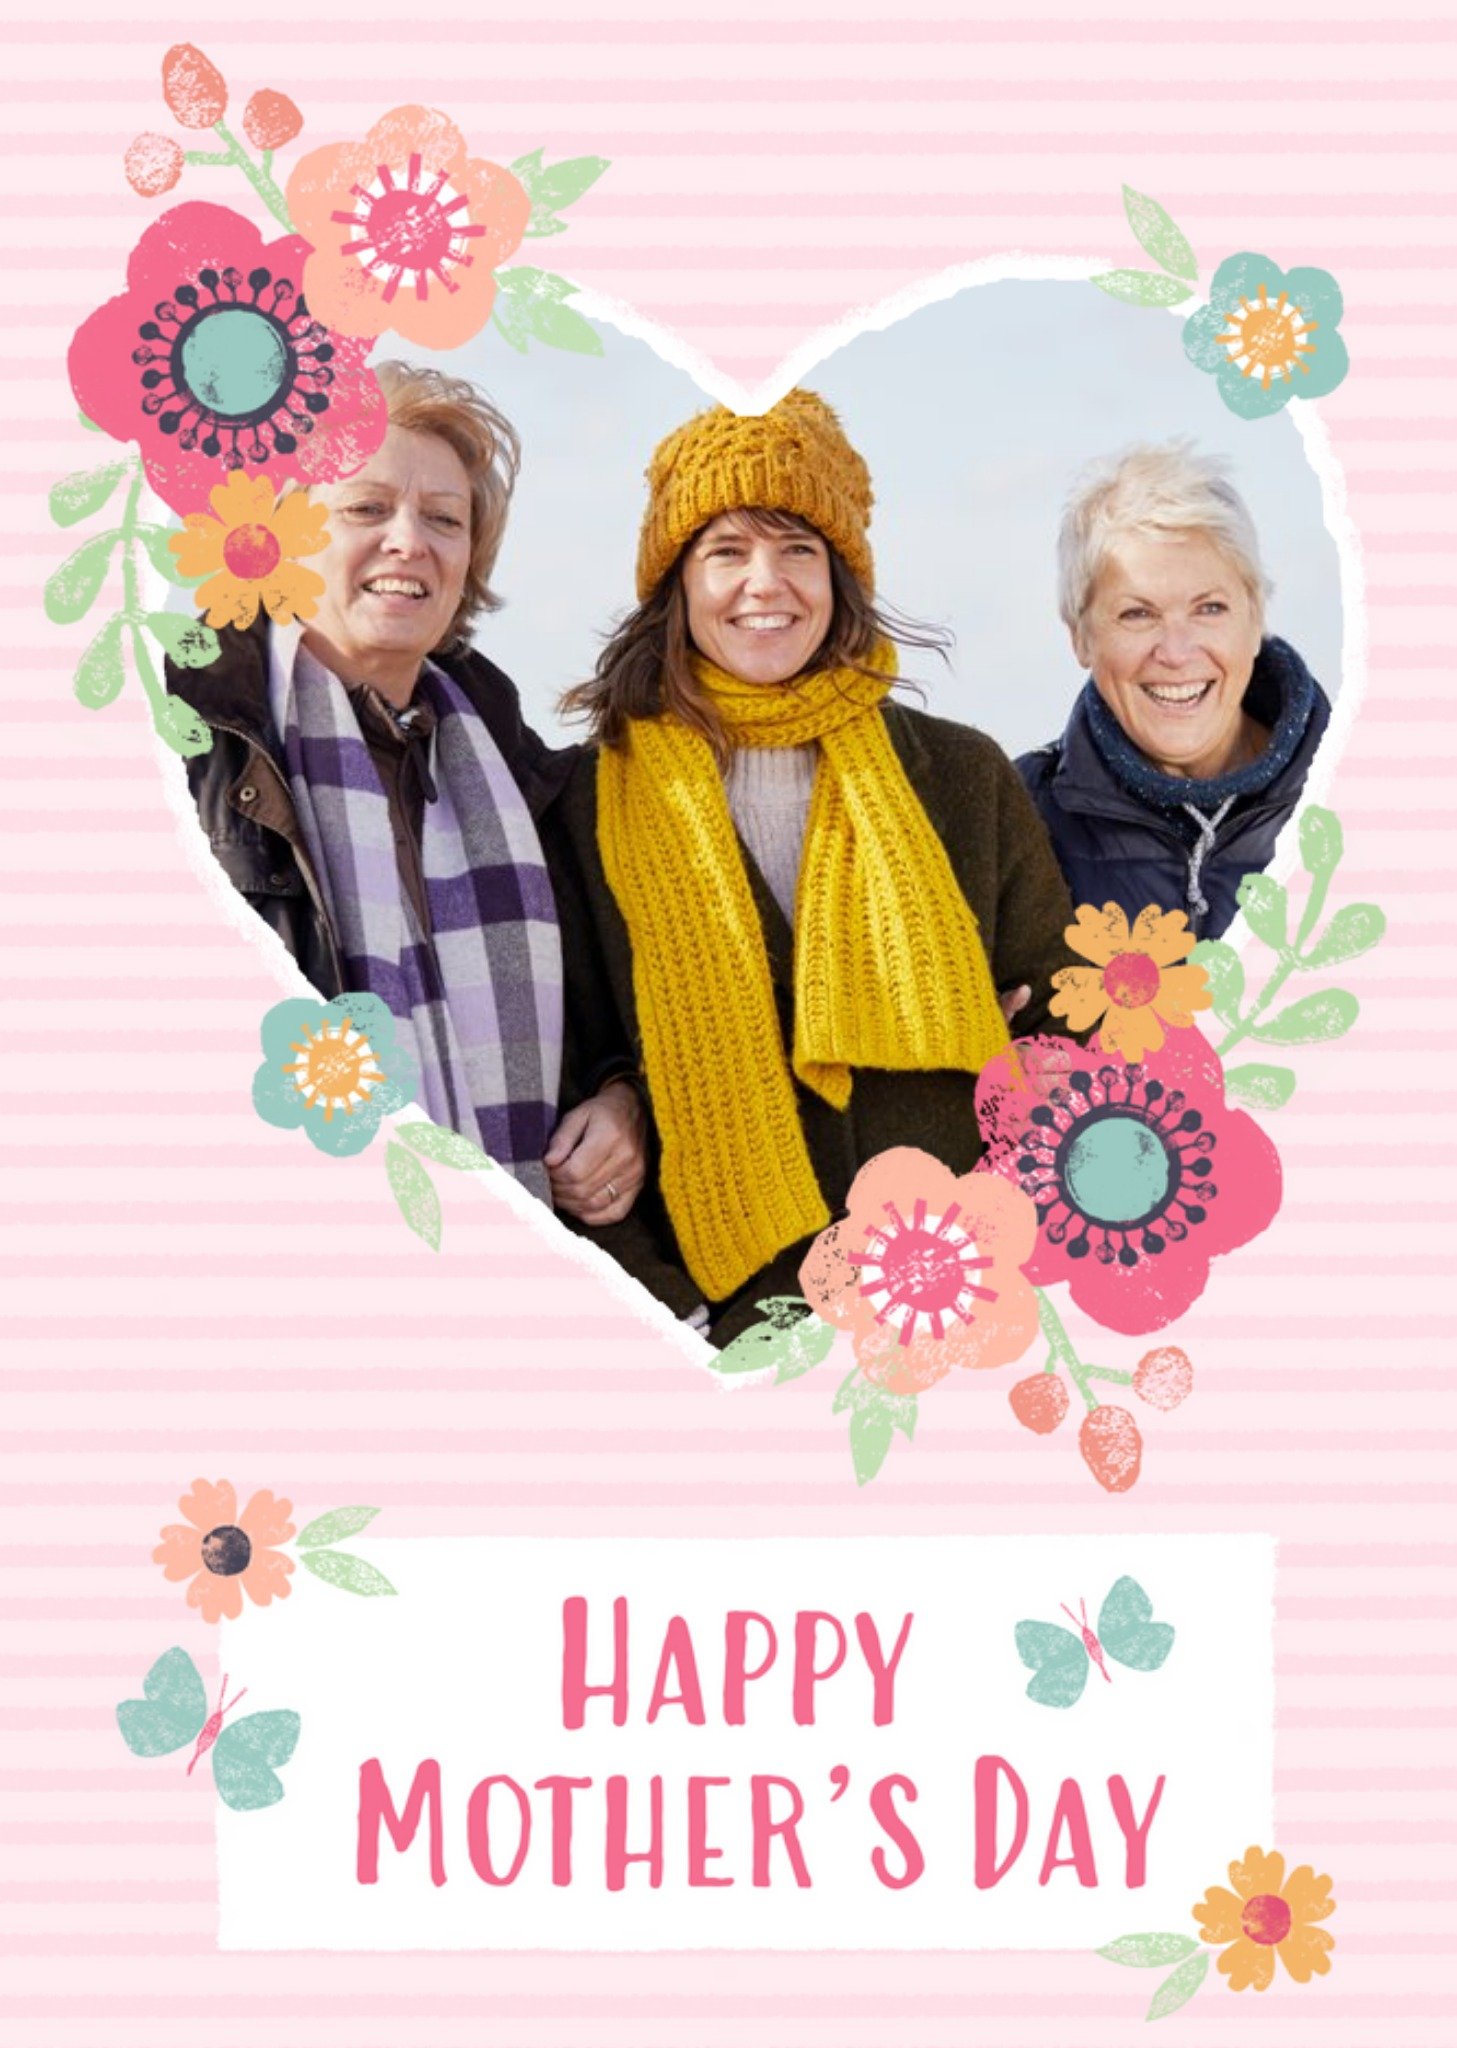 Moonpig Striped And Flower Design Happy Mothers Day Photo Card, Large